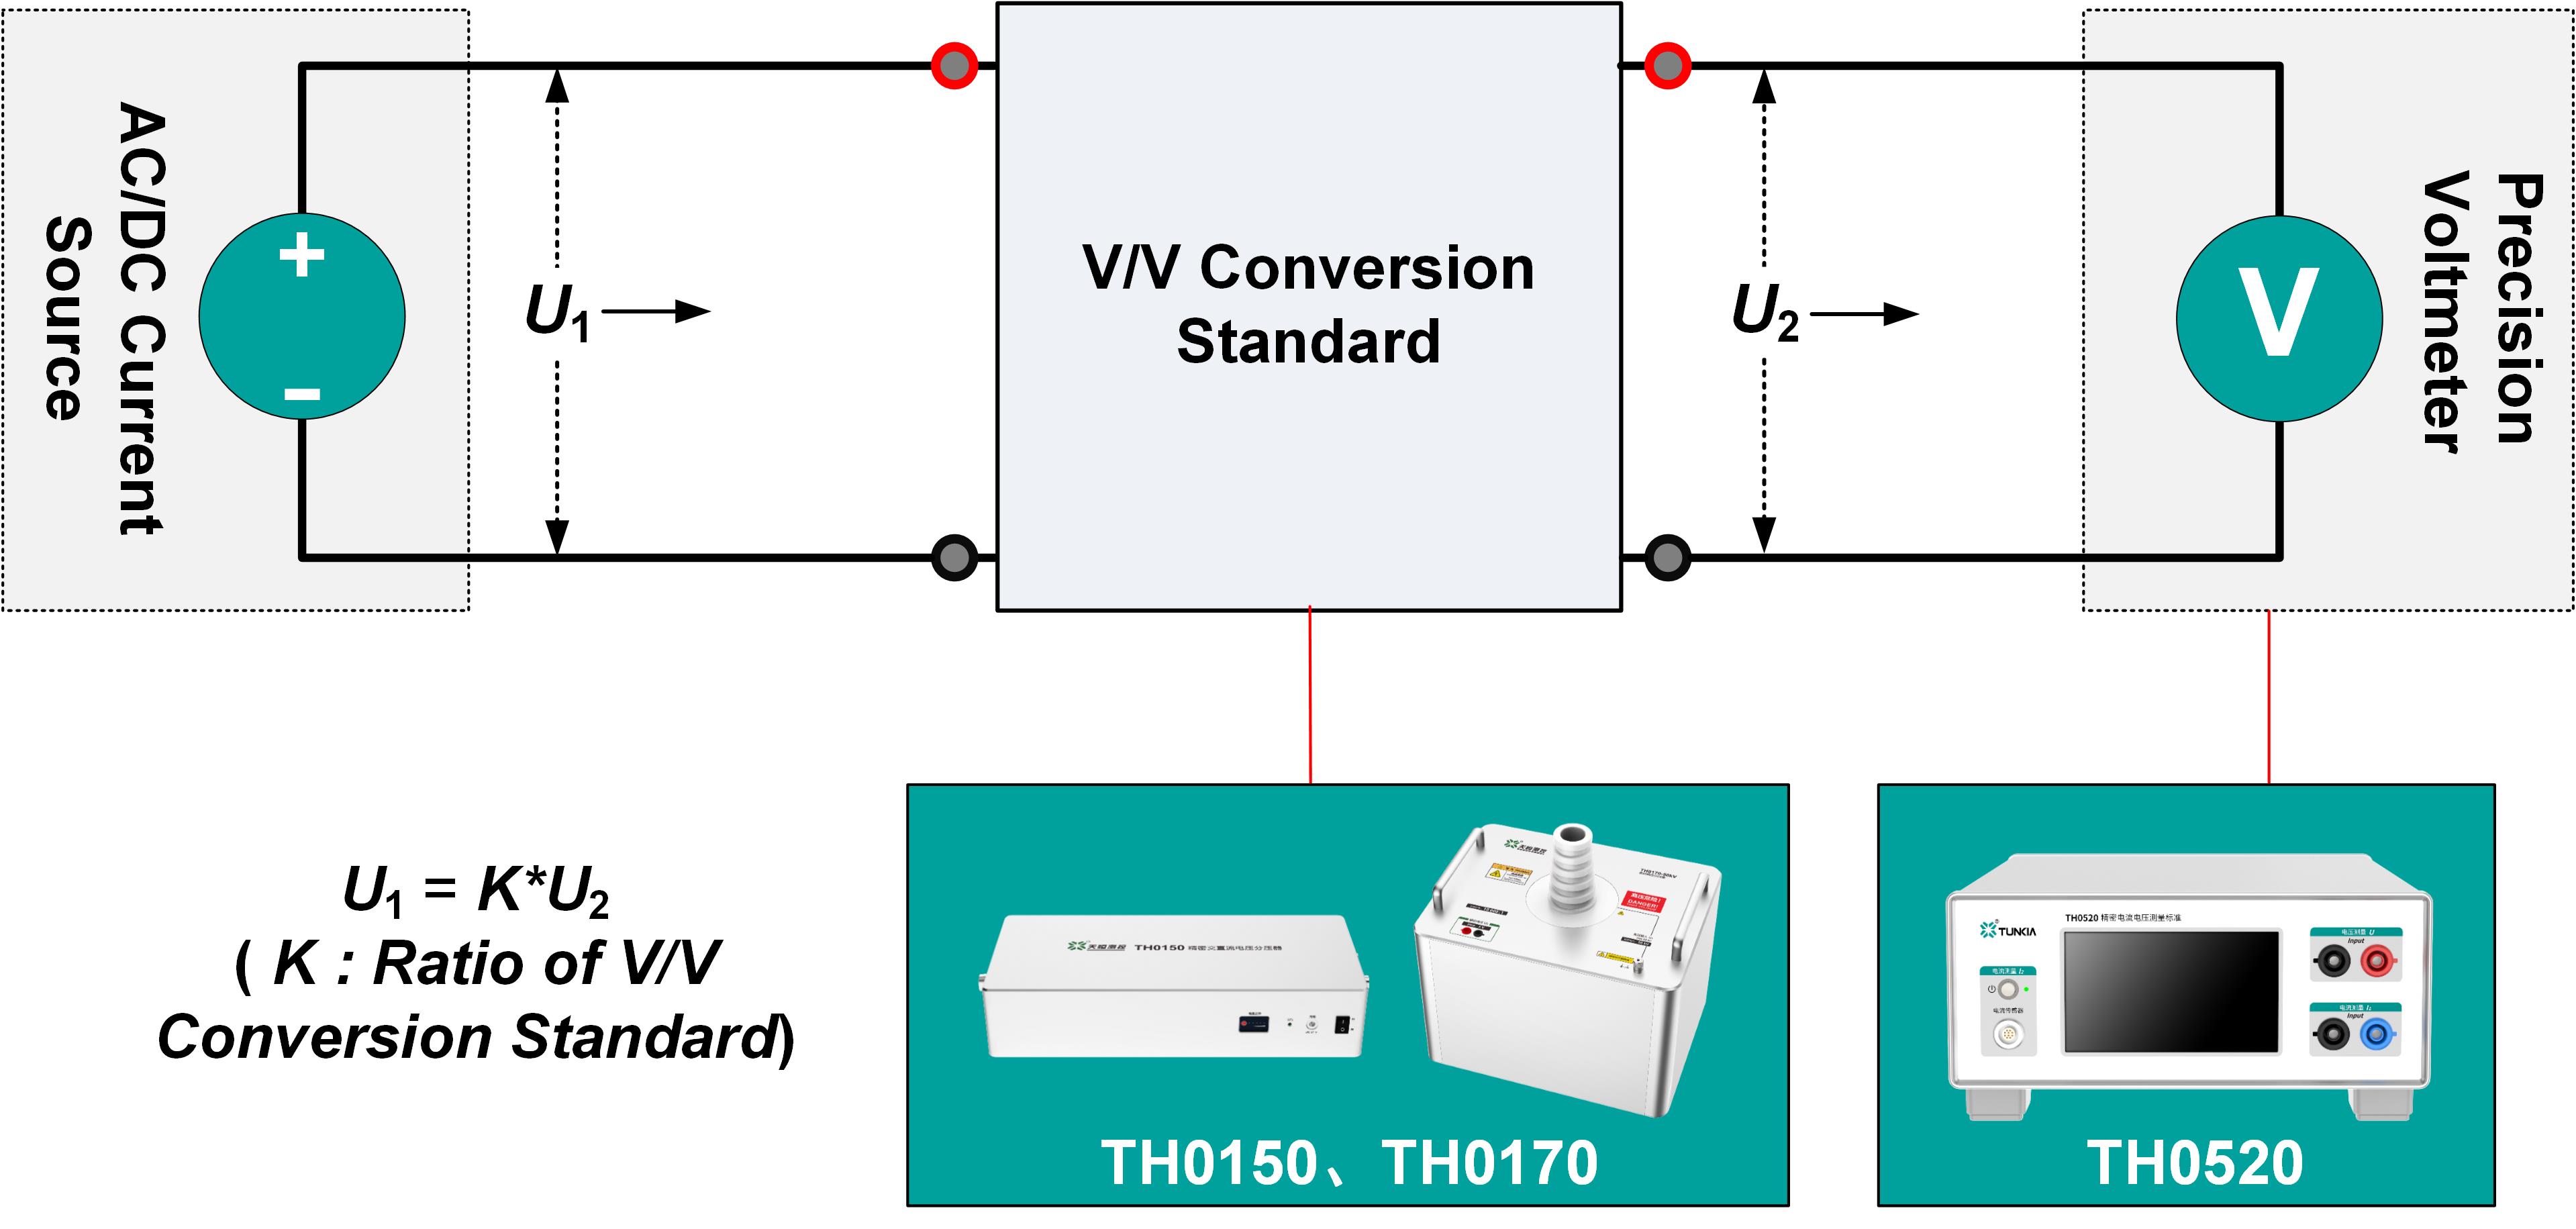 TH0520 Precision Current and Voltage Measurement Standard Connect VV to measure high voltage